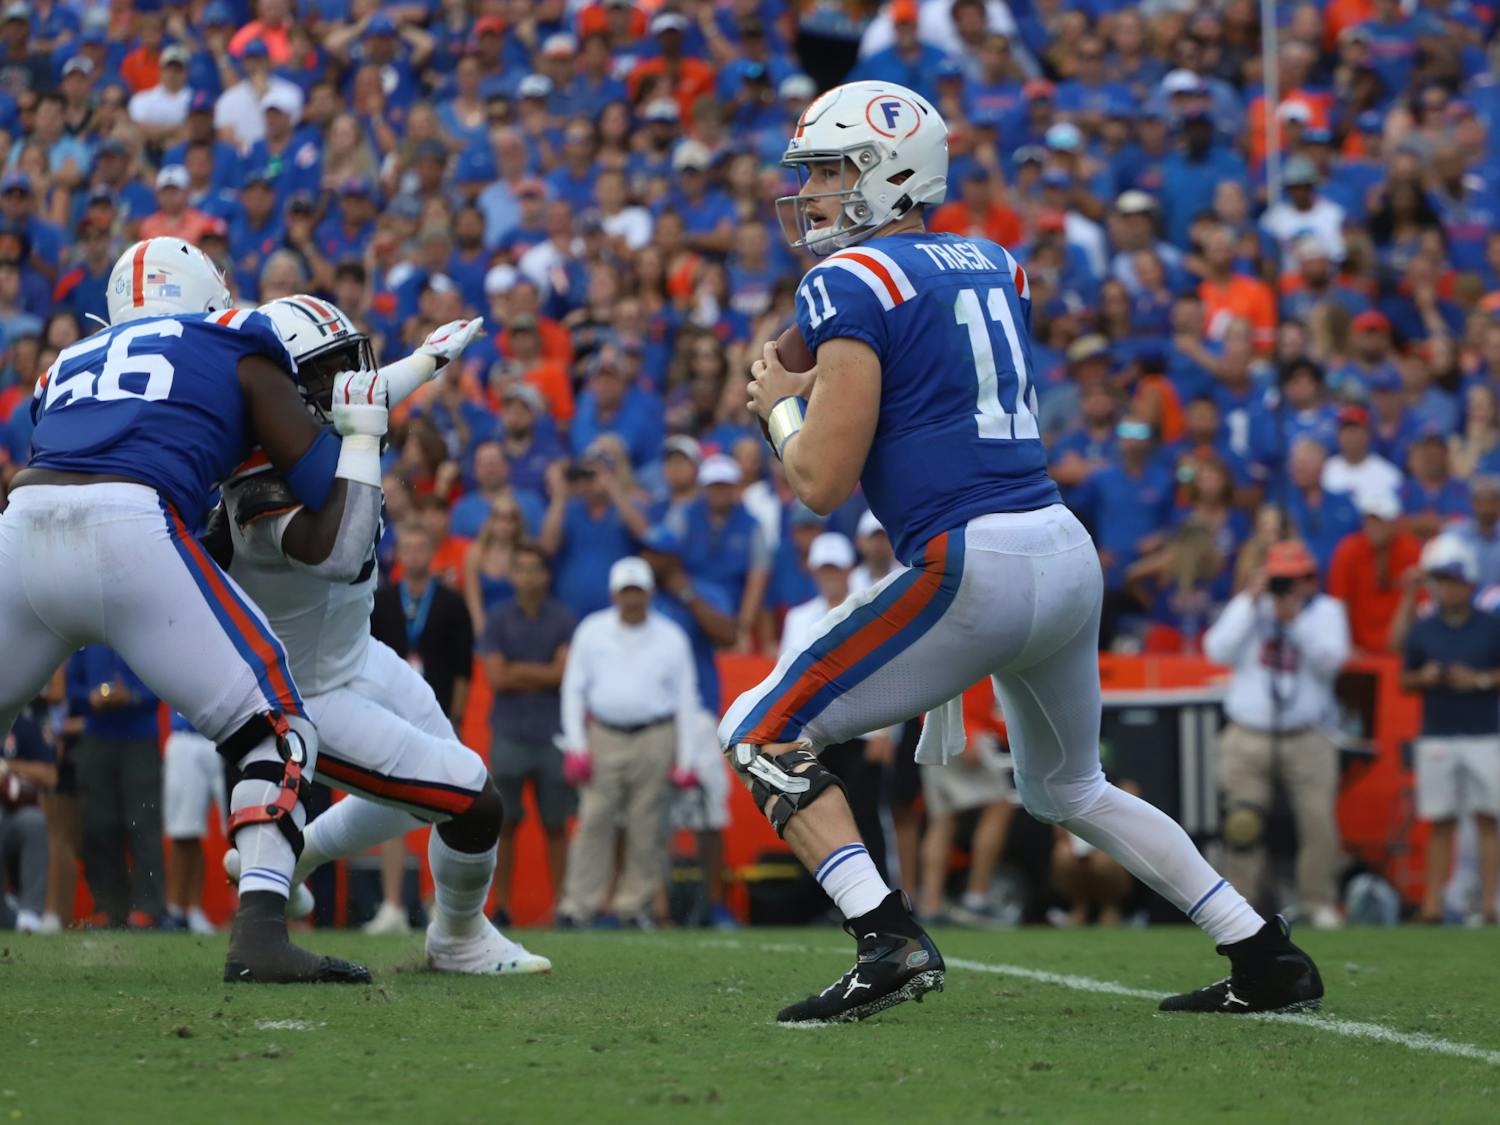 Florida quarterback Kyle Trask drops back to pass against the Auburn Tigers Oct. 5, 2019. Trask is now a member of the NFL&#x27;s Tampa Bay Buccaneers. ﻿